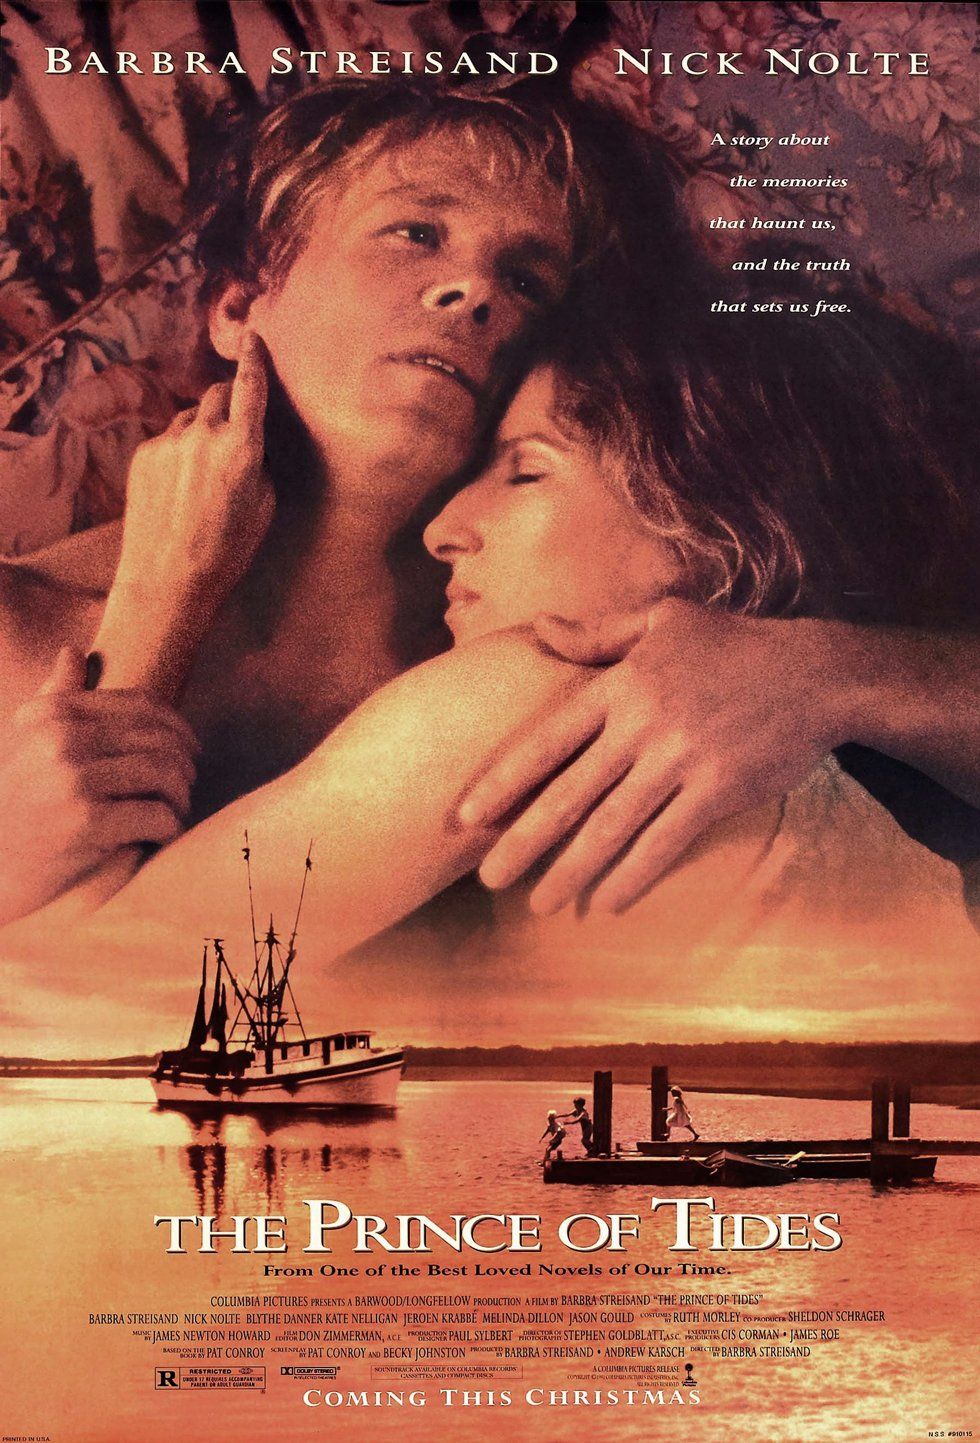 Prince of Tides U.S. theatrical poster.